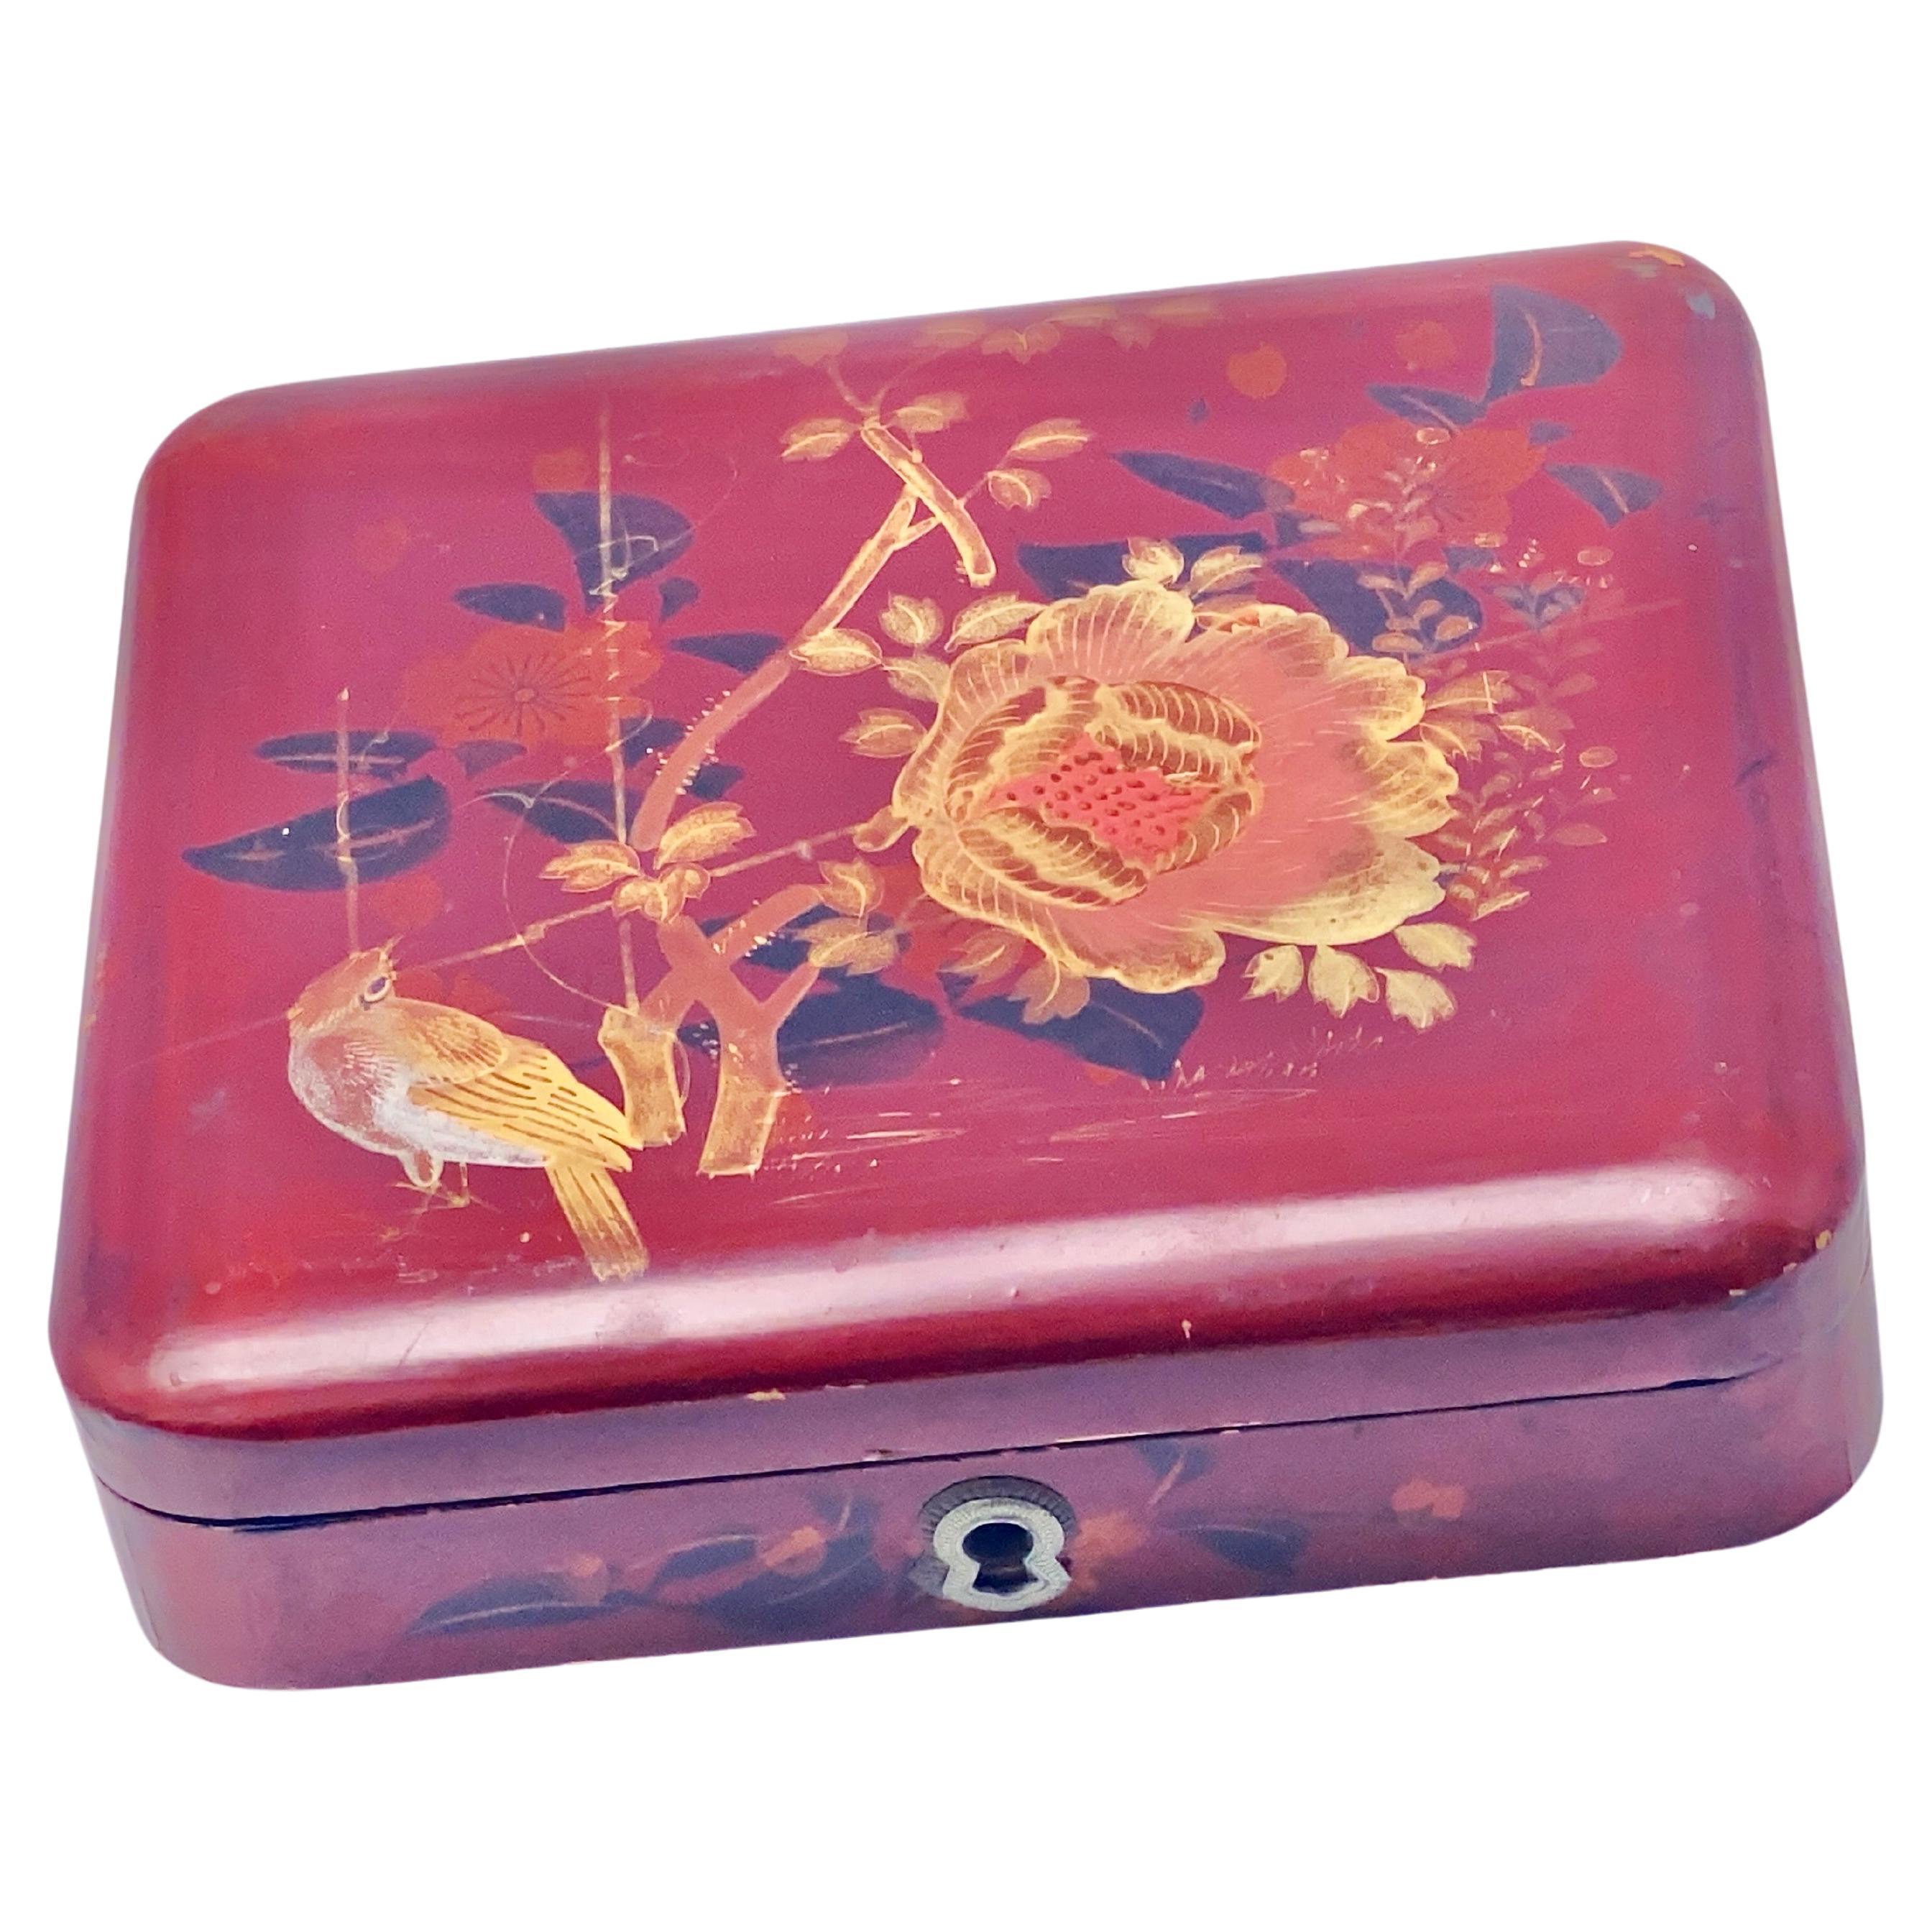 Wood Lidded Box, Hand-Painted and Lacquered, Japanese, Early 20Century